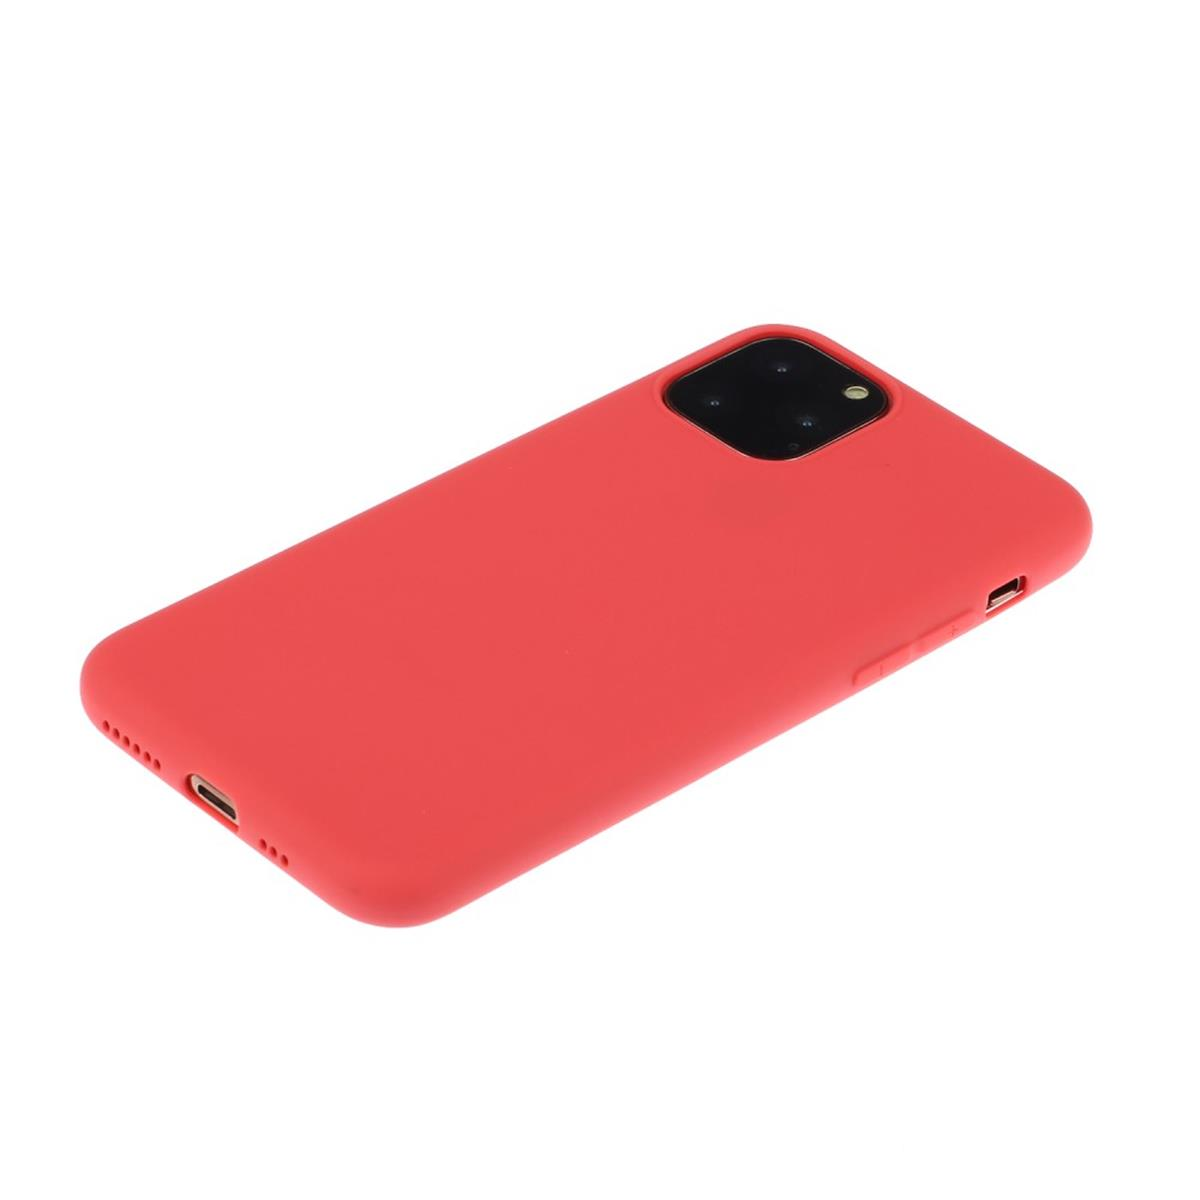 Apple, Pro iPhone Handycase 11 Backcover, Max, Rot aus COVERKINGZ Silikon,